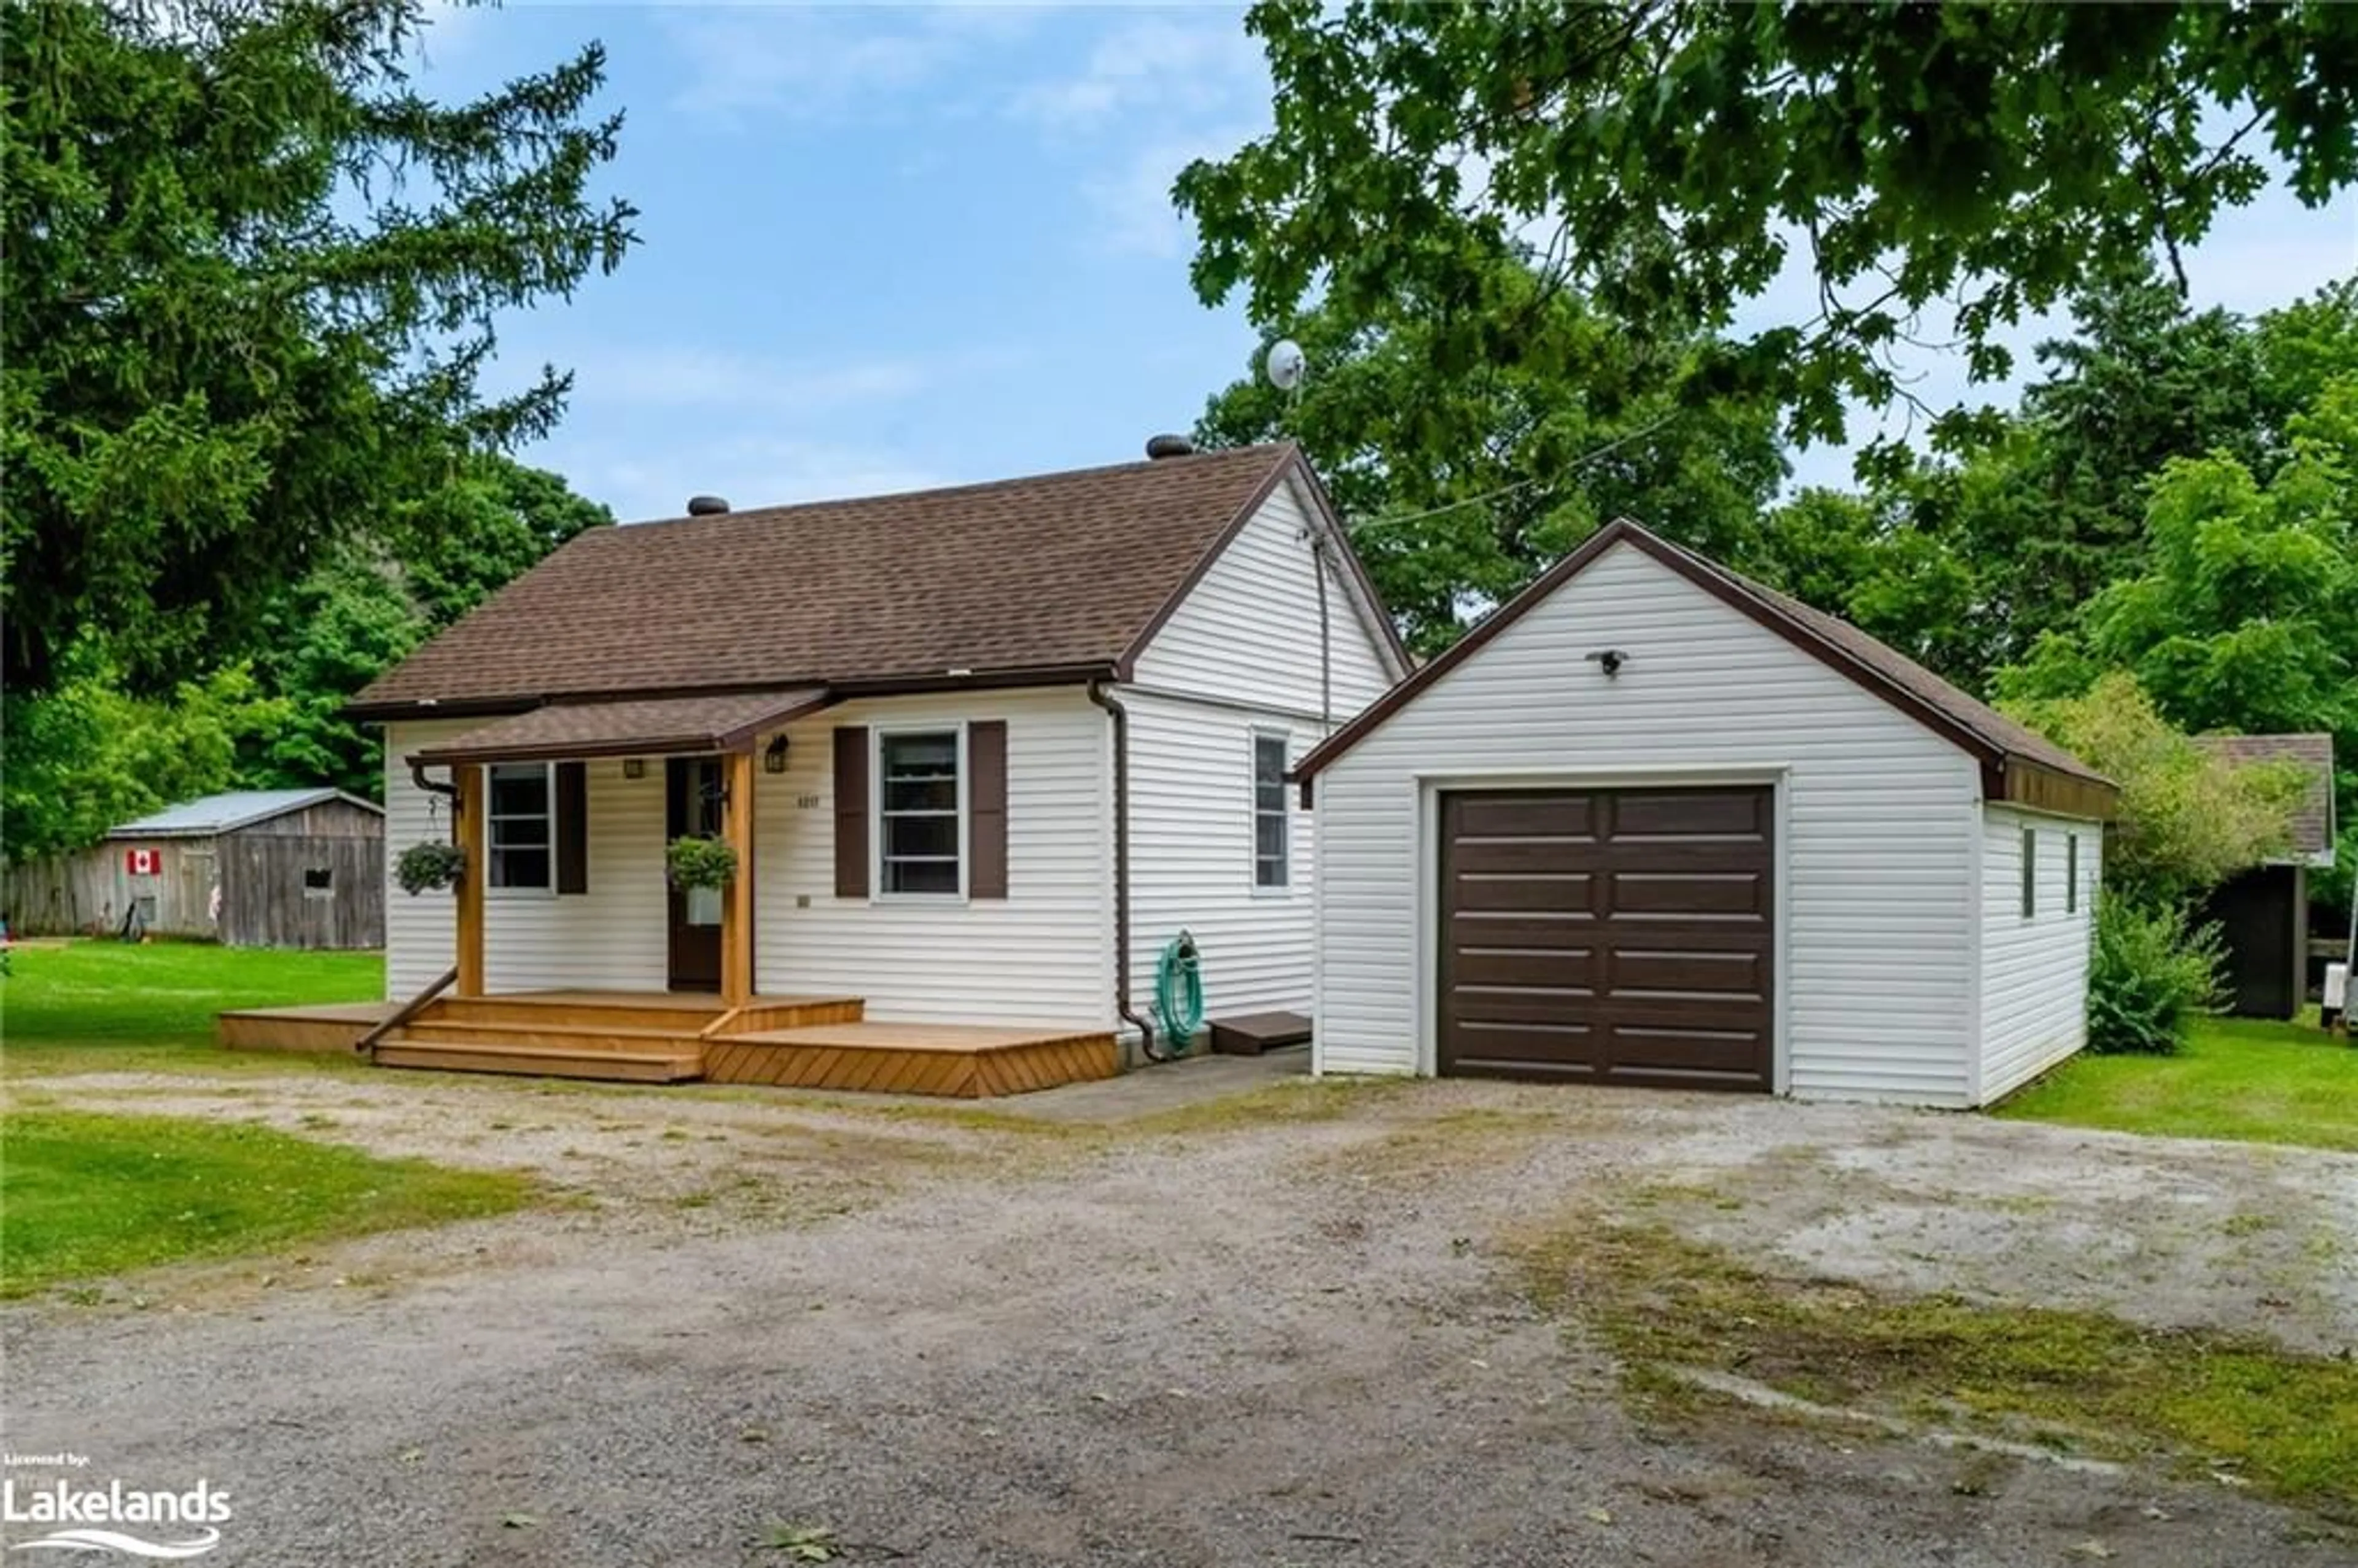 Cottage for 1217 Old Barrie Rd, Shanty Bay Ontario L0L 2L0